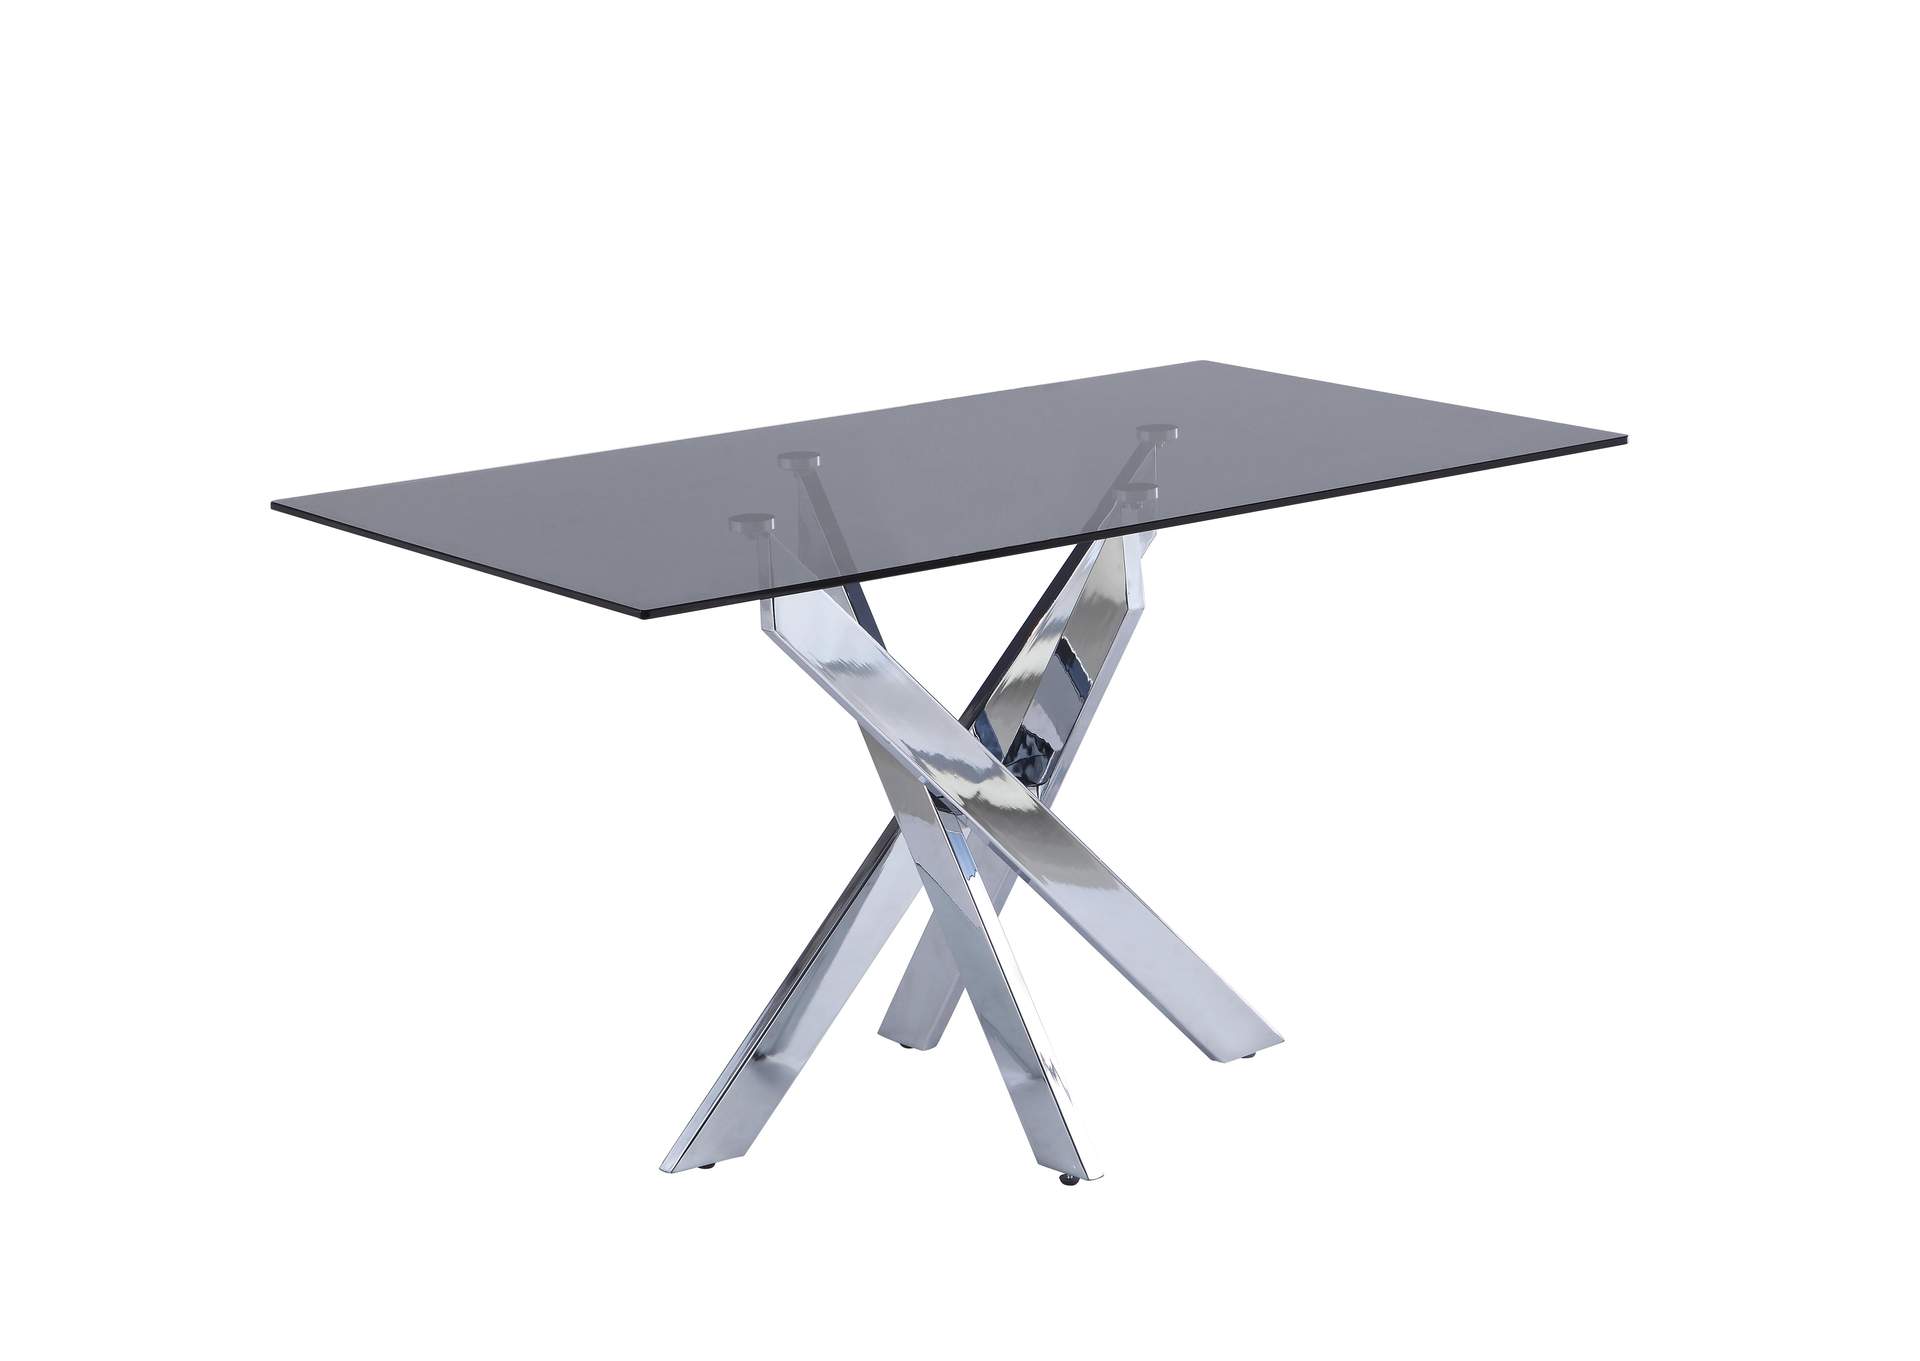 Modern Rectangular Glass Top Dining Table,Chintaly Imports